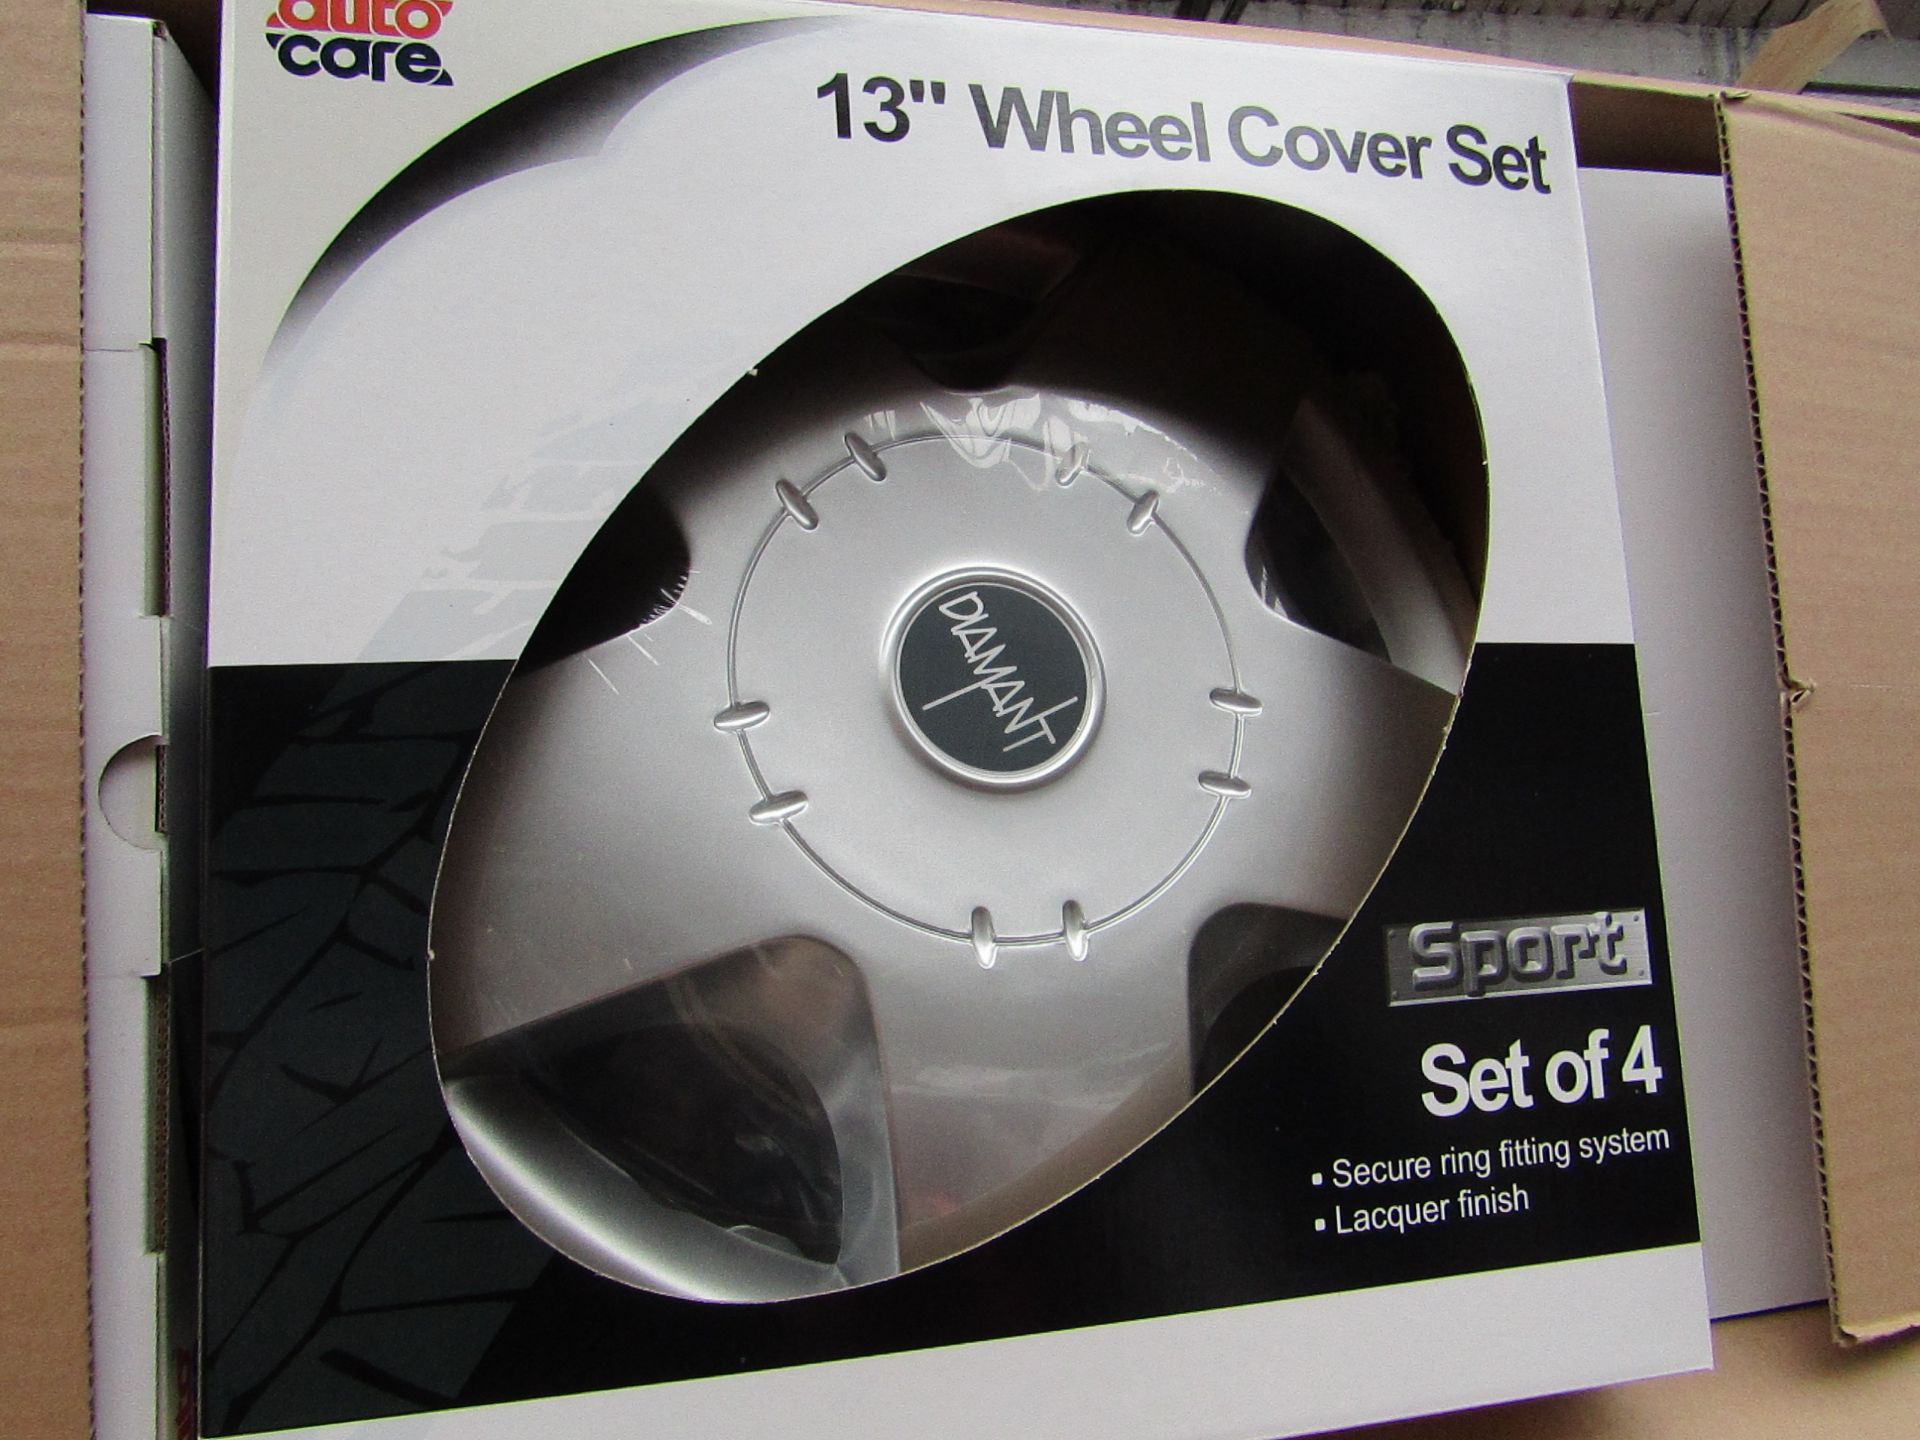 Set of 4 Auto Care 13" wheel trims, new and boxed